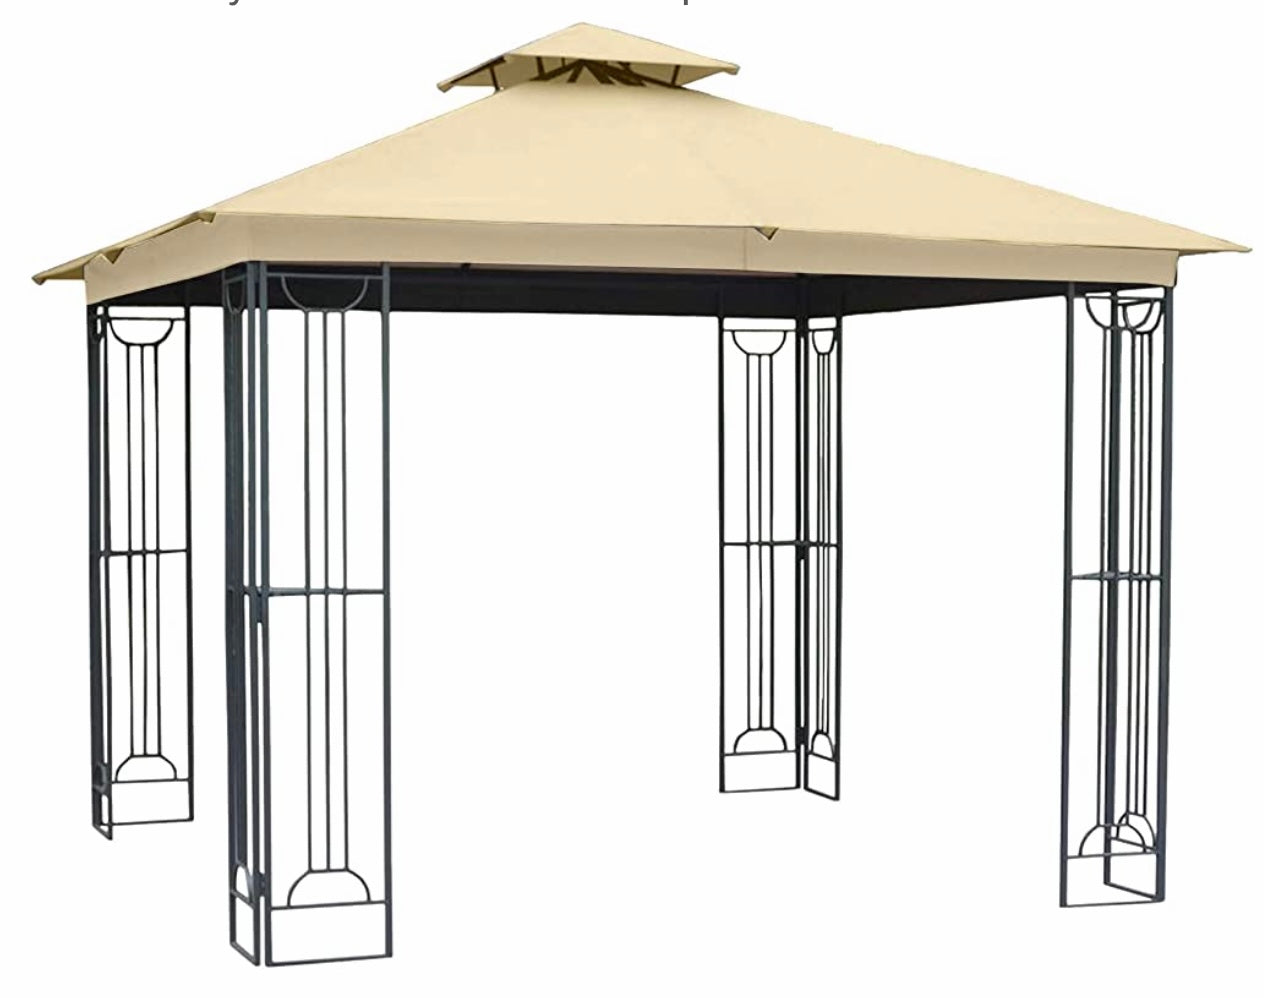 Replacement Canopy Top Cover Compatible with The Laurel Canyon GAZ2136 Gazebo - RipLock 350